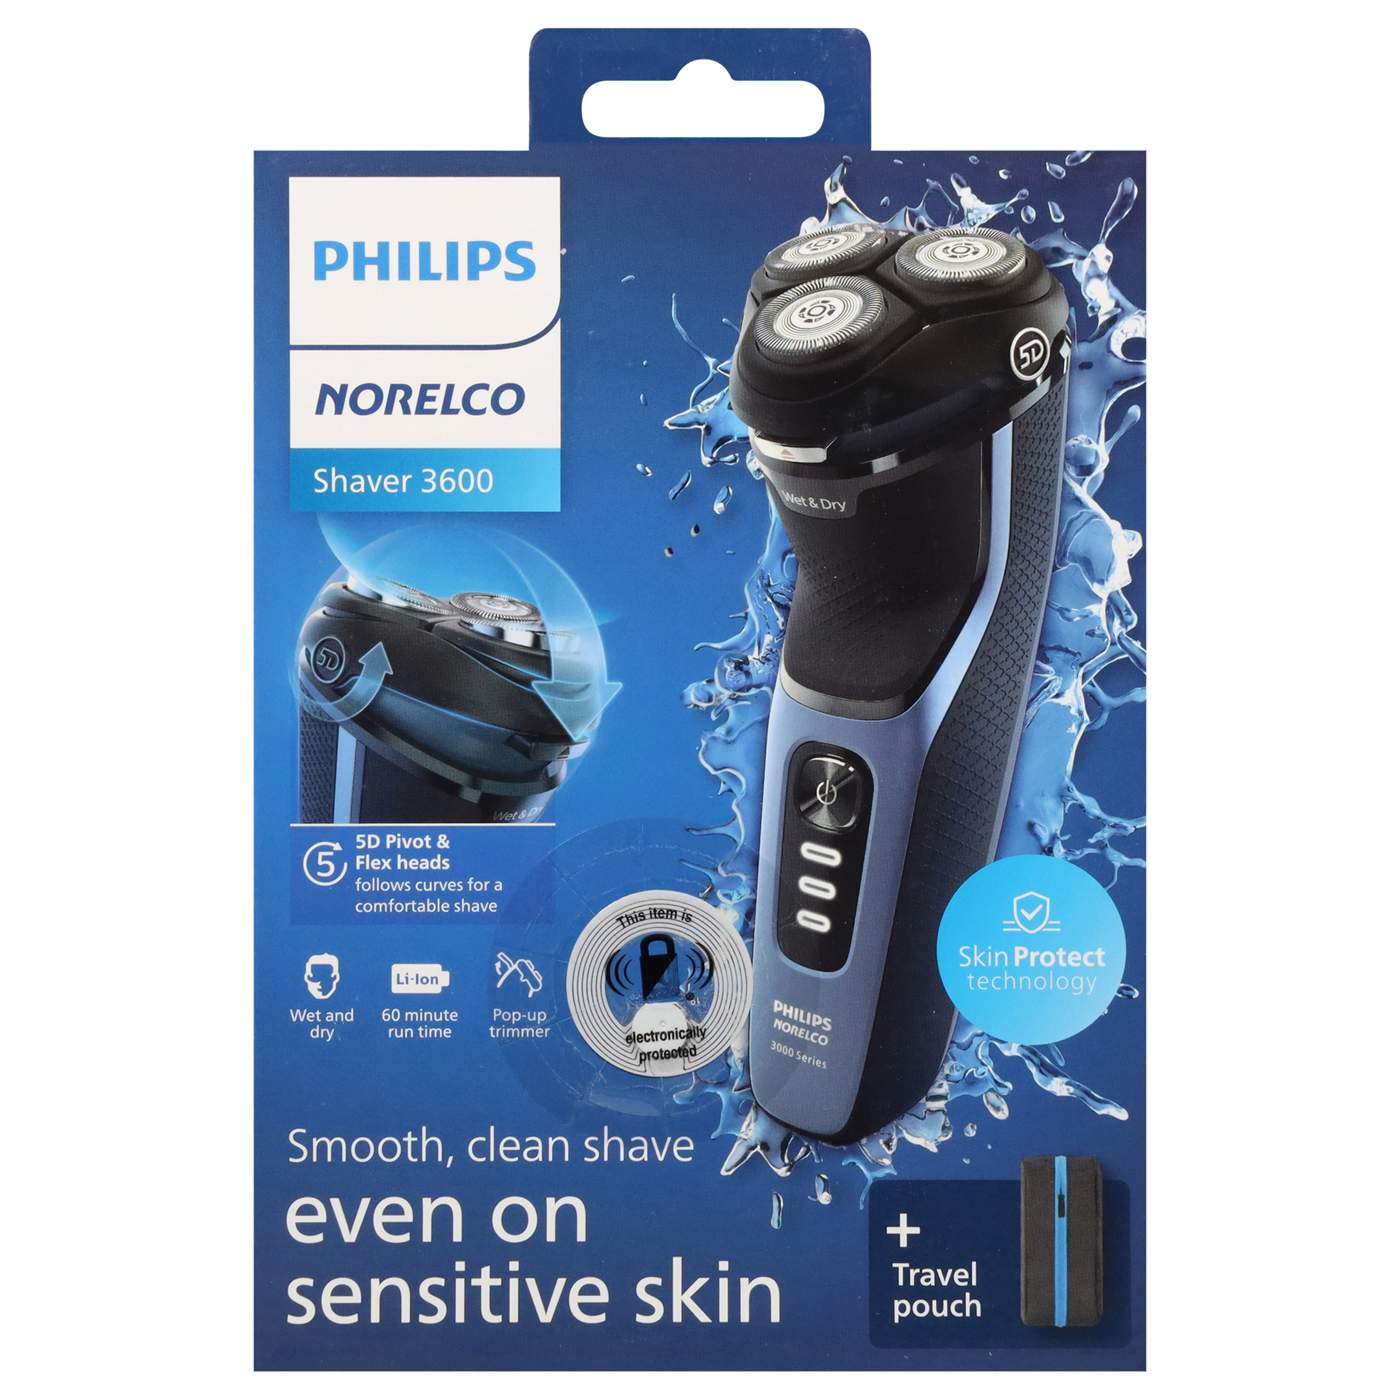 Philips Norelco Shaver 3600 Wet & Dry Cordless Electric Razor; image 1 of 2